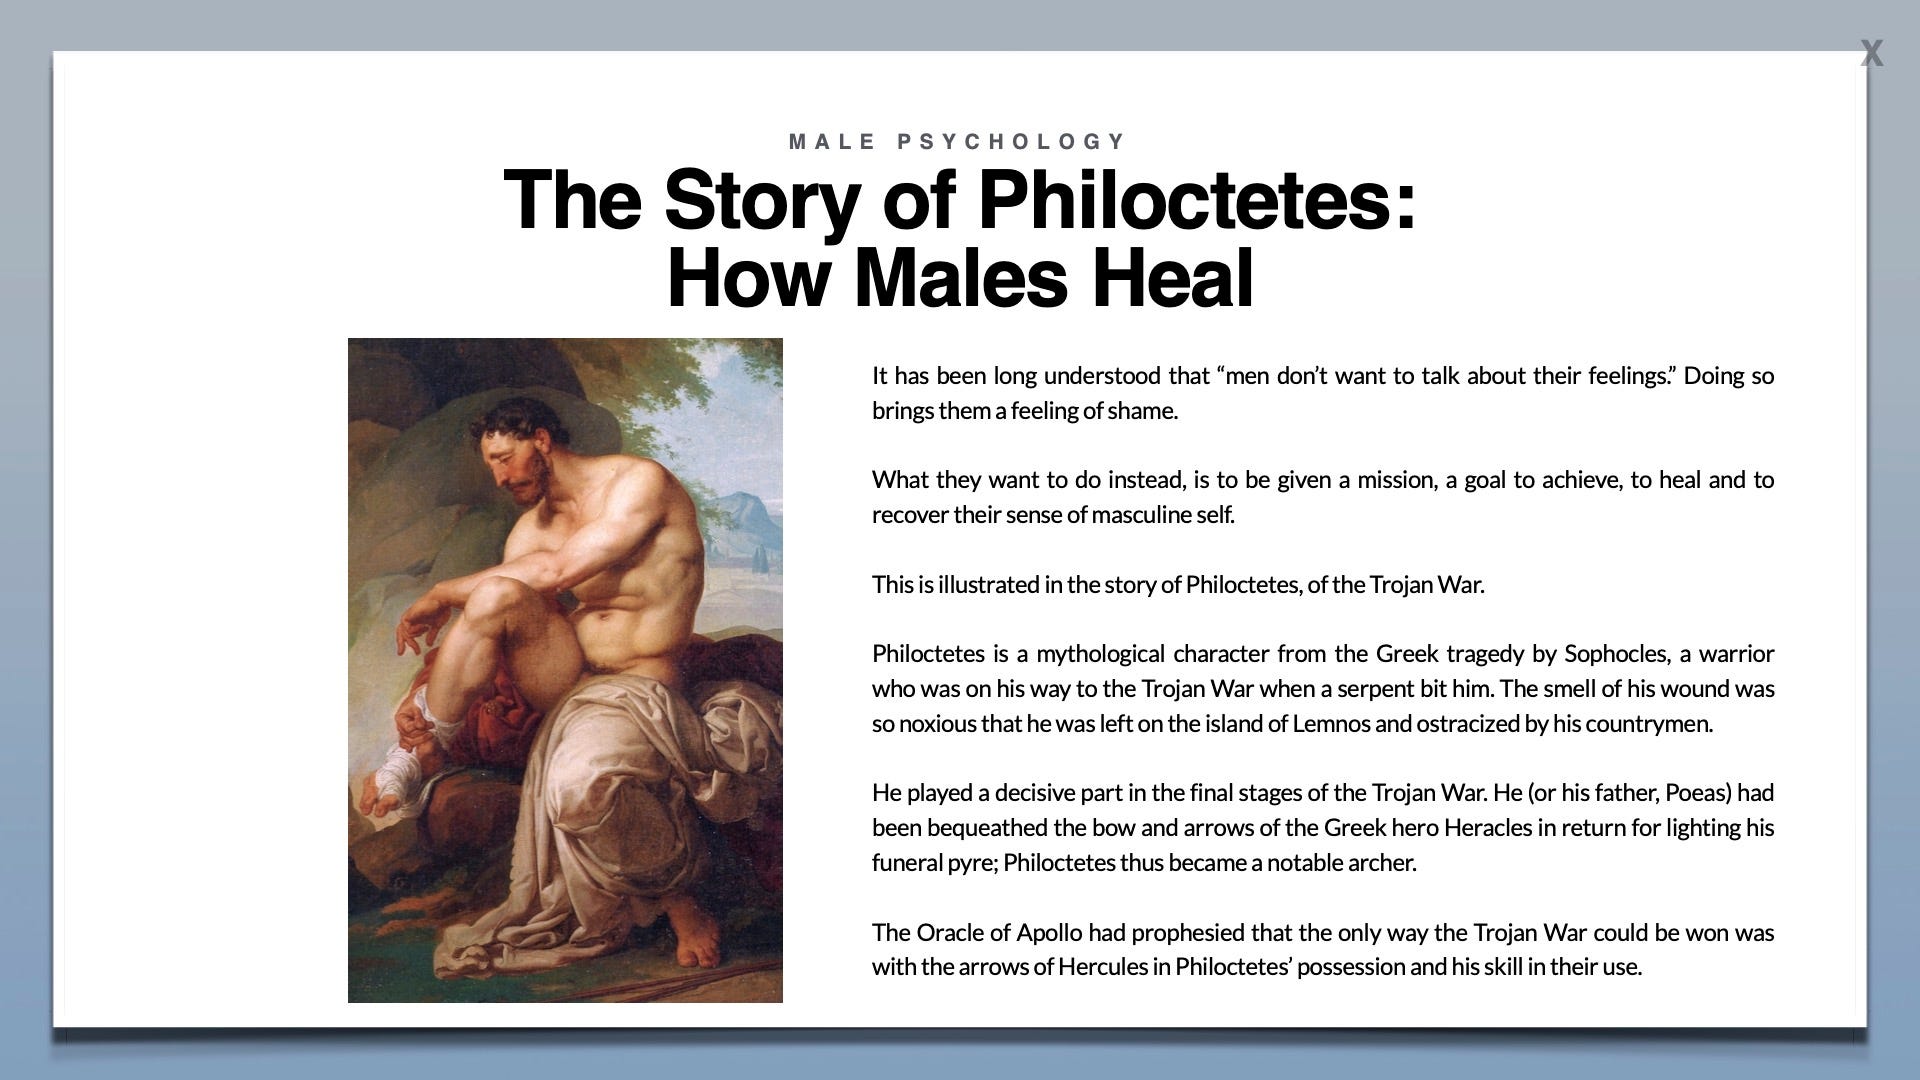 A Brief History of Wartime PTSD - From Ancient Greece to